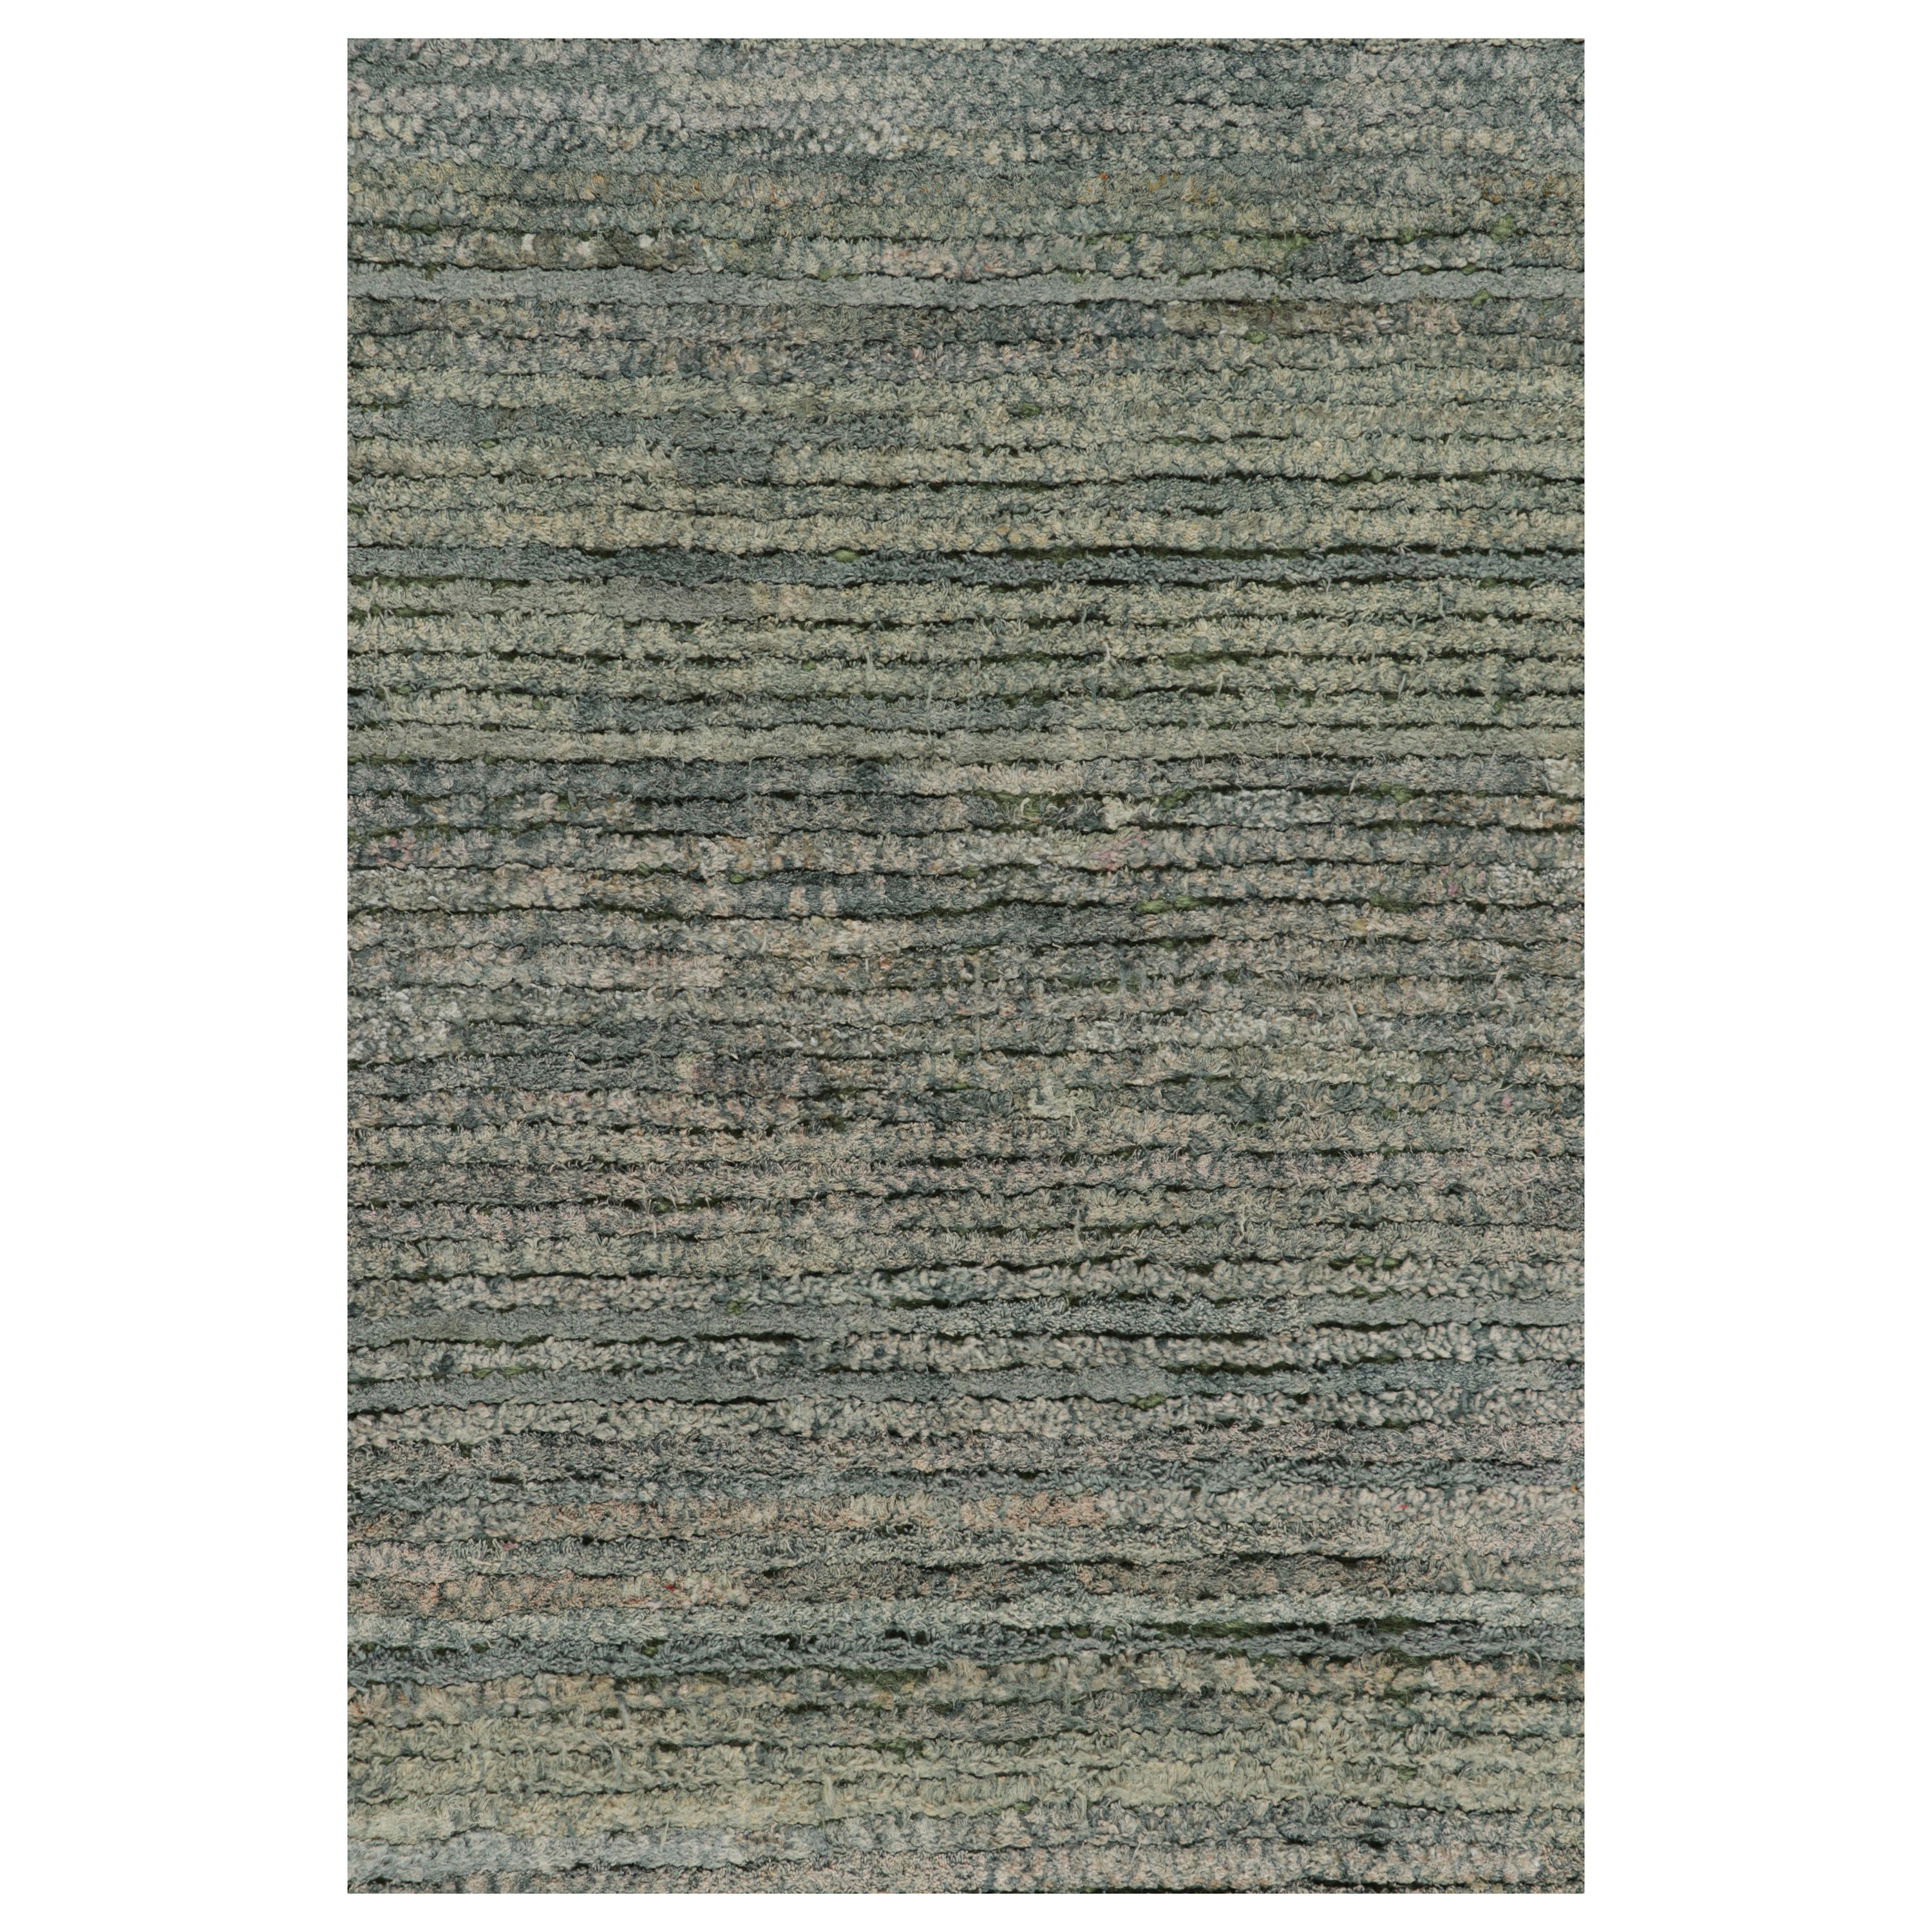 Rug & Kilim’s Contemporary Textural Rug in Green and Blue Tones